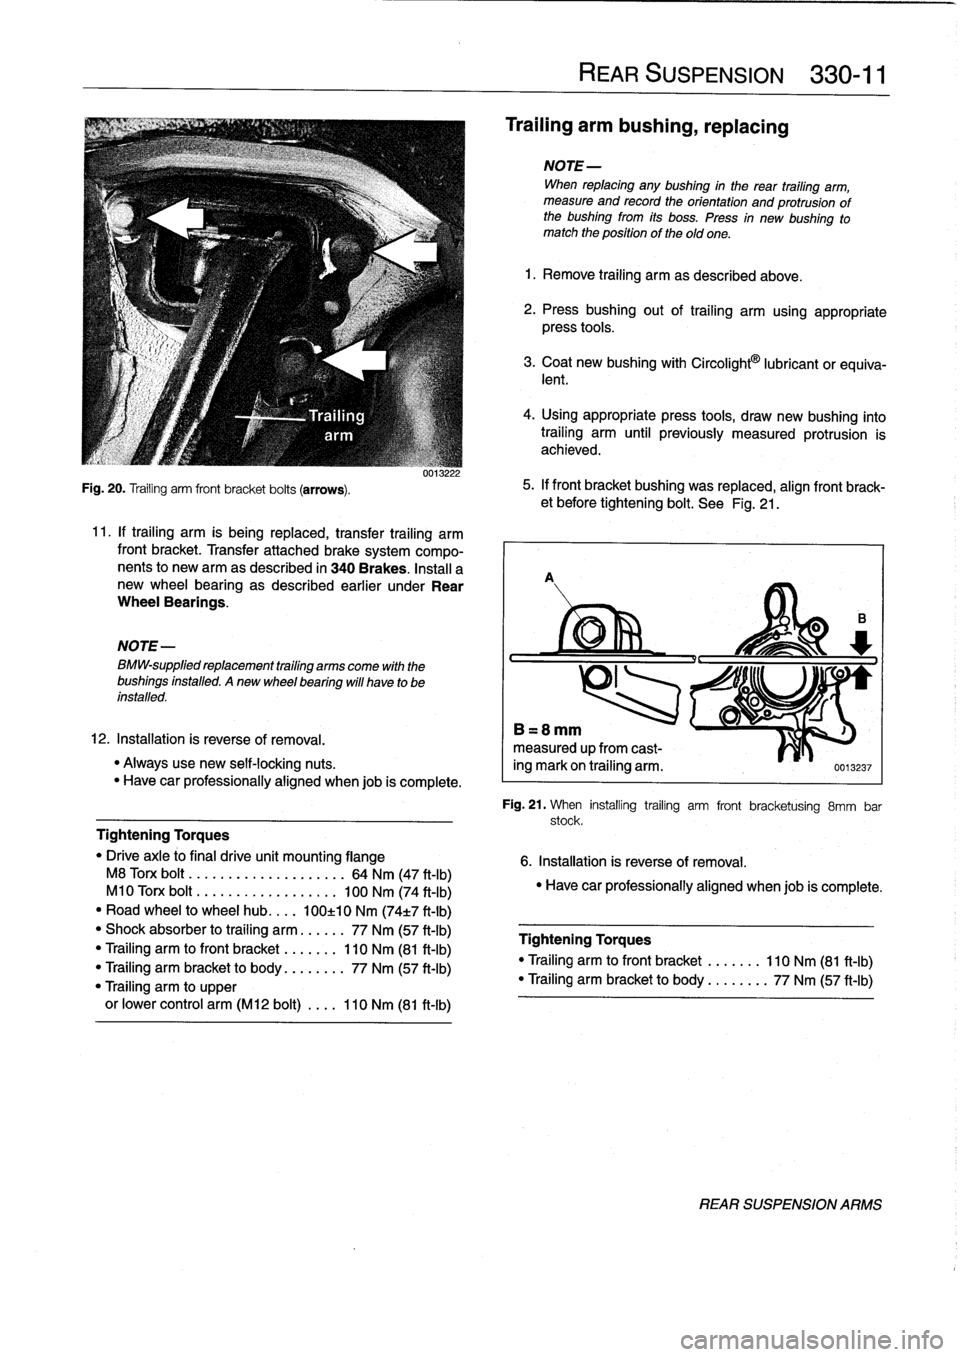 BMW 323i 1998 E36 Owners Guide 
Fig
.
20
.
Trailing
arm
front
bracket
bolts
(arrows)
.

NOTE-

BMW-supplied
replacement
trailing
arms
come
with
the
bushings
installed
.
Anew
wheel
bearing
will
have
to
be
installed
.

0013222

11
.
